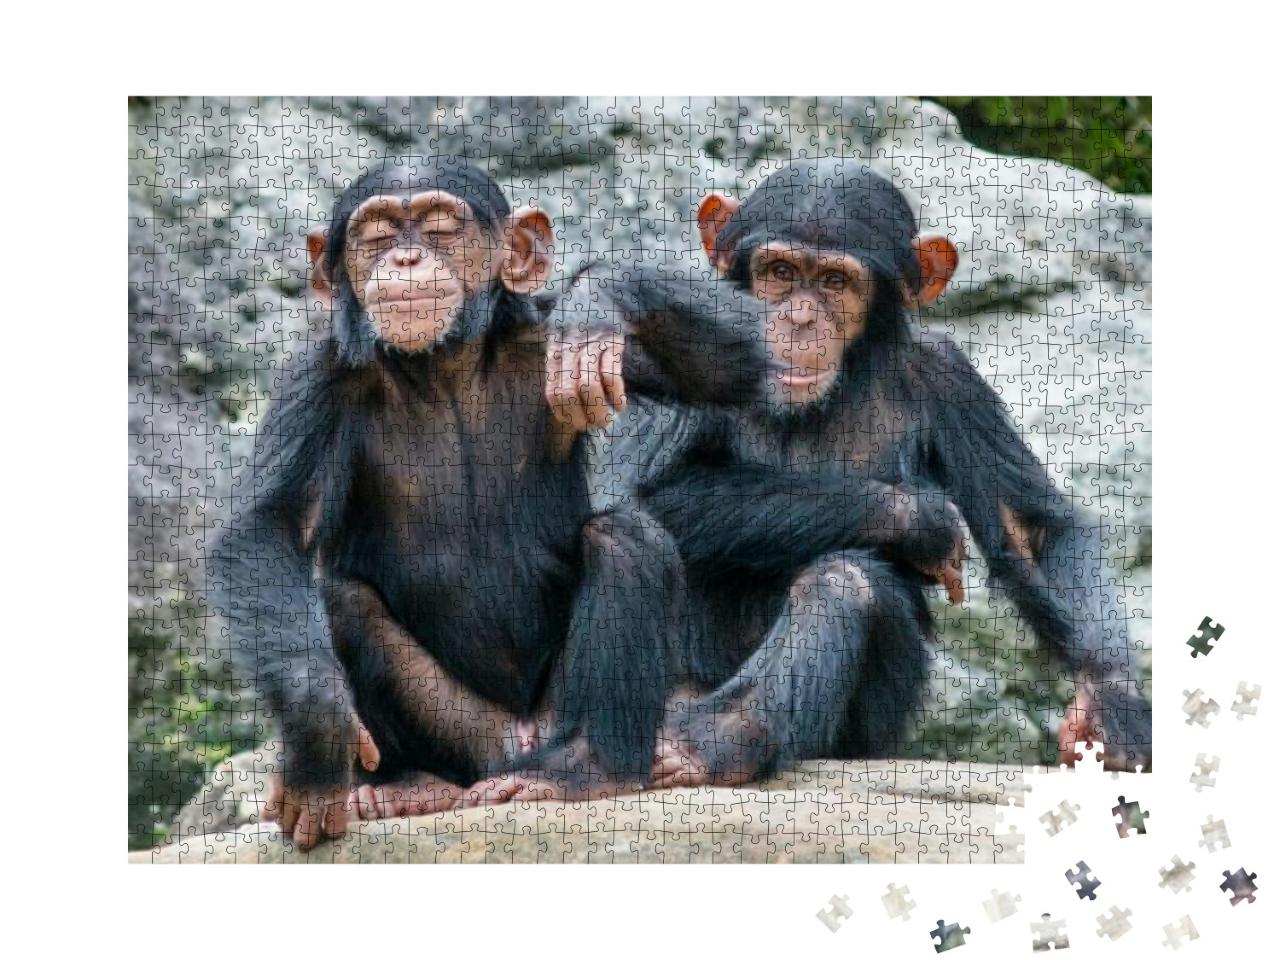 Two Playful Baby Chimpanzees Sitting Side by Side... Jigsaw Puzzle with 1000 pieces